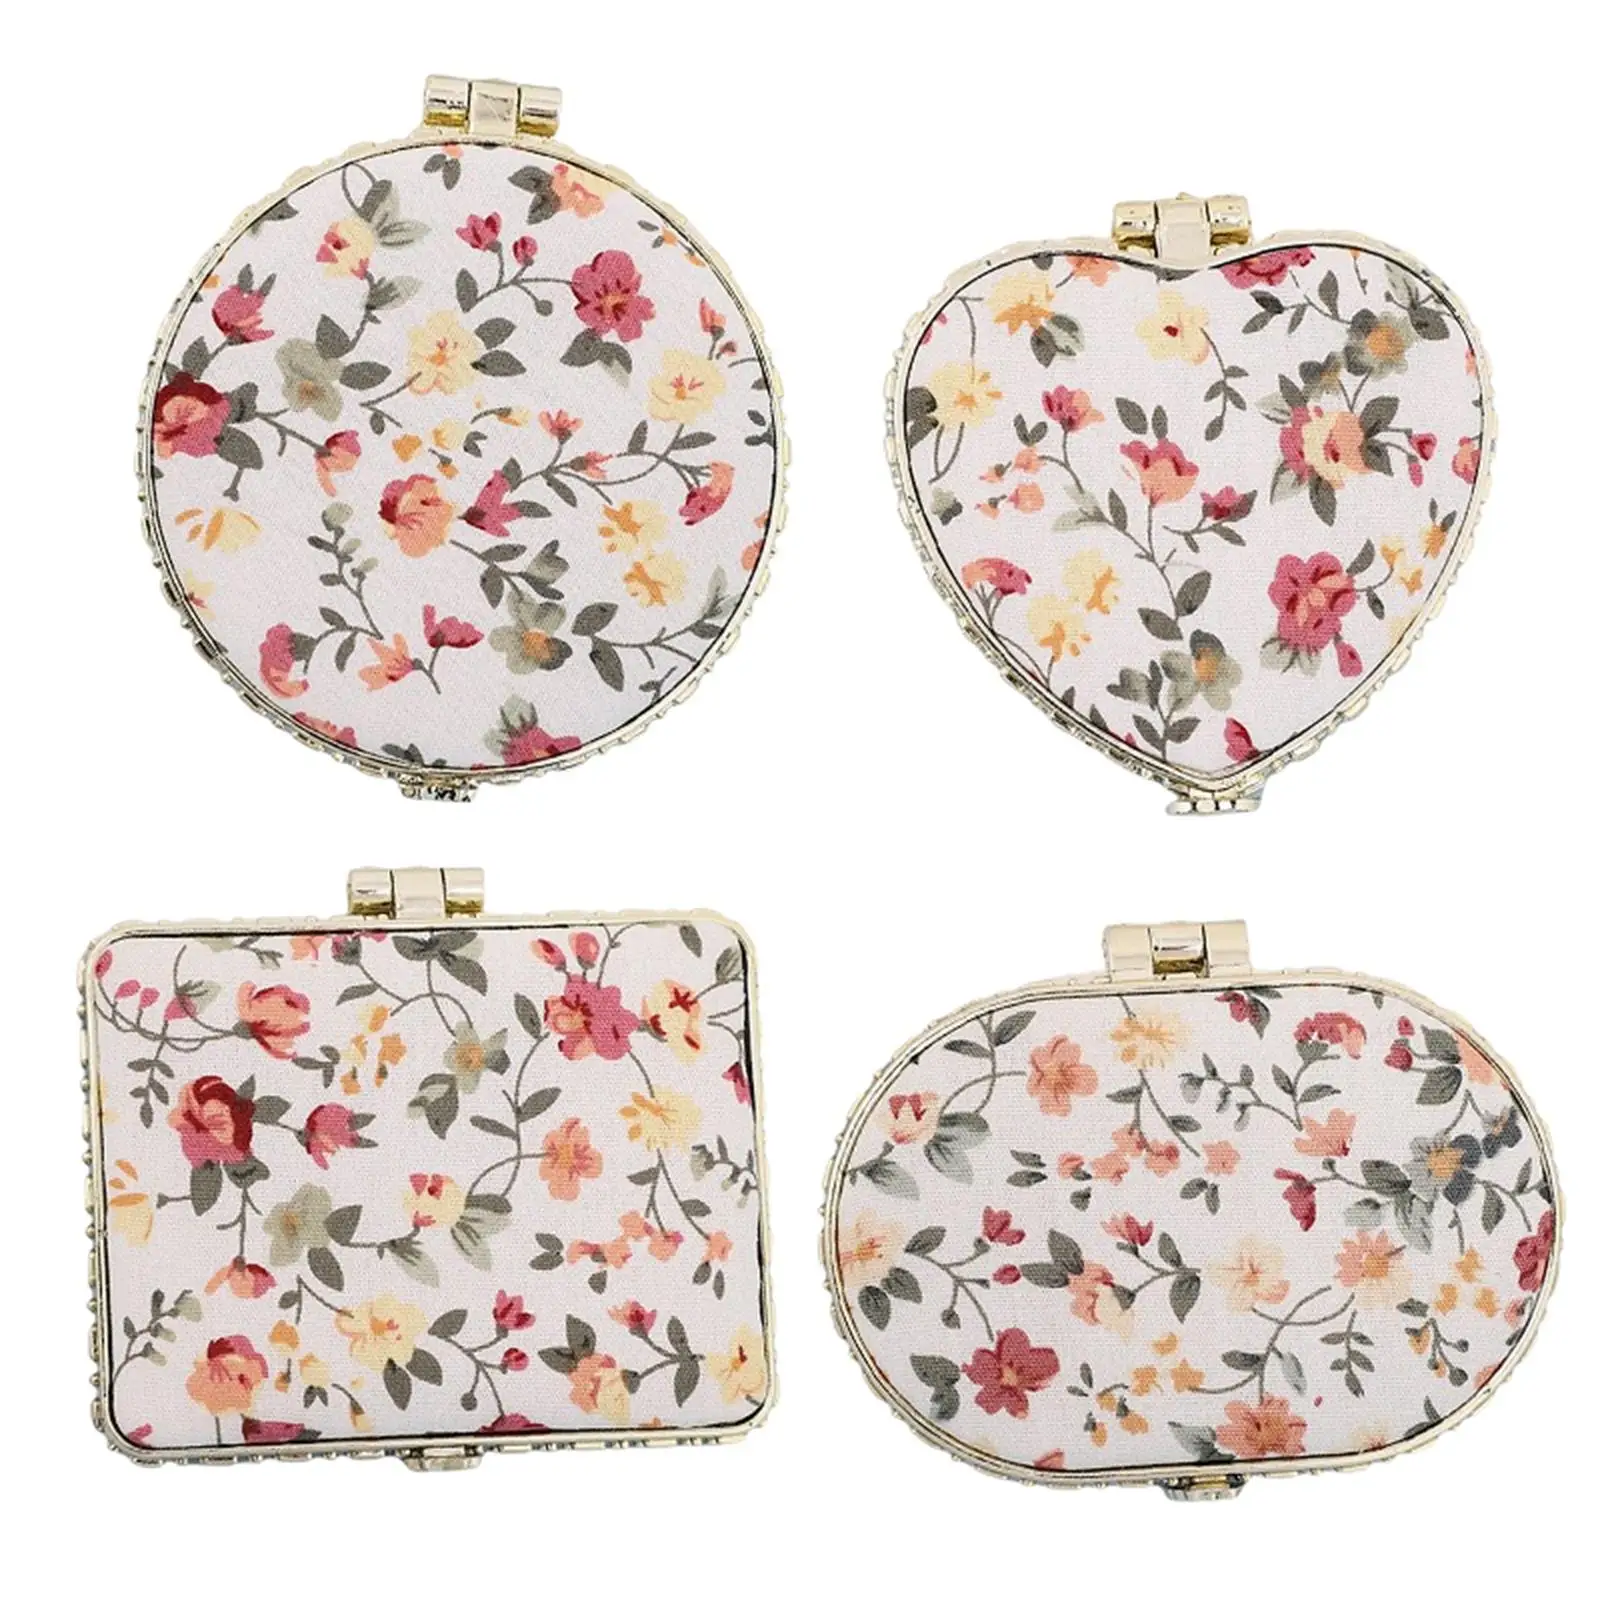 Portable Travel Makeup Mirror Folding Mirror 2 Sided Floral Printed Cosmetic Mirror for Purse Travel Home Office Girls Women